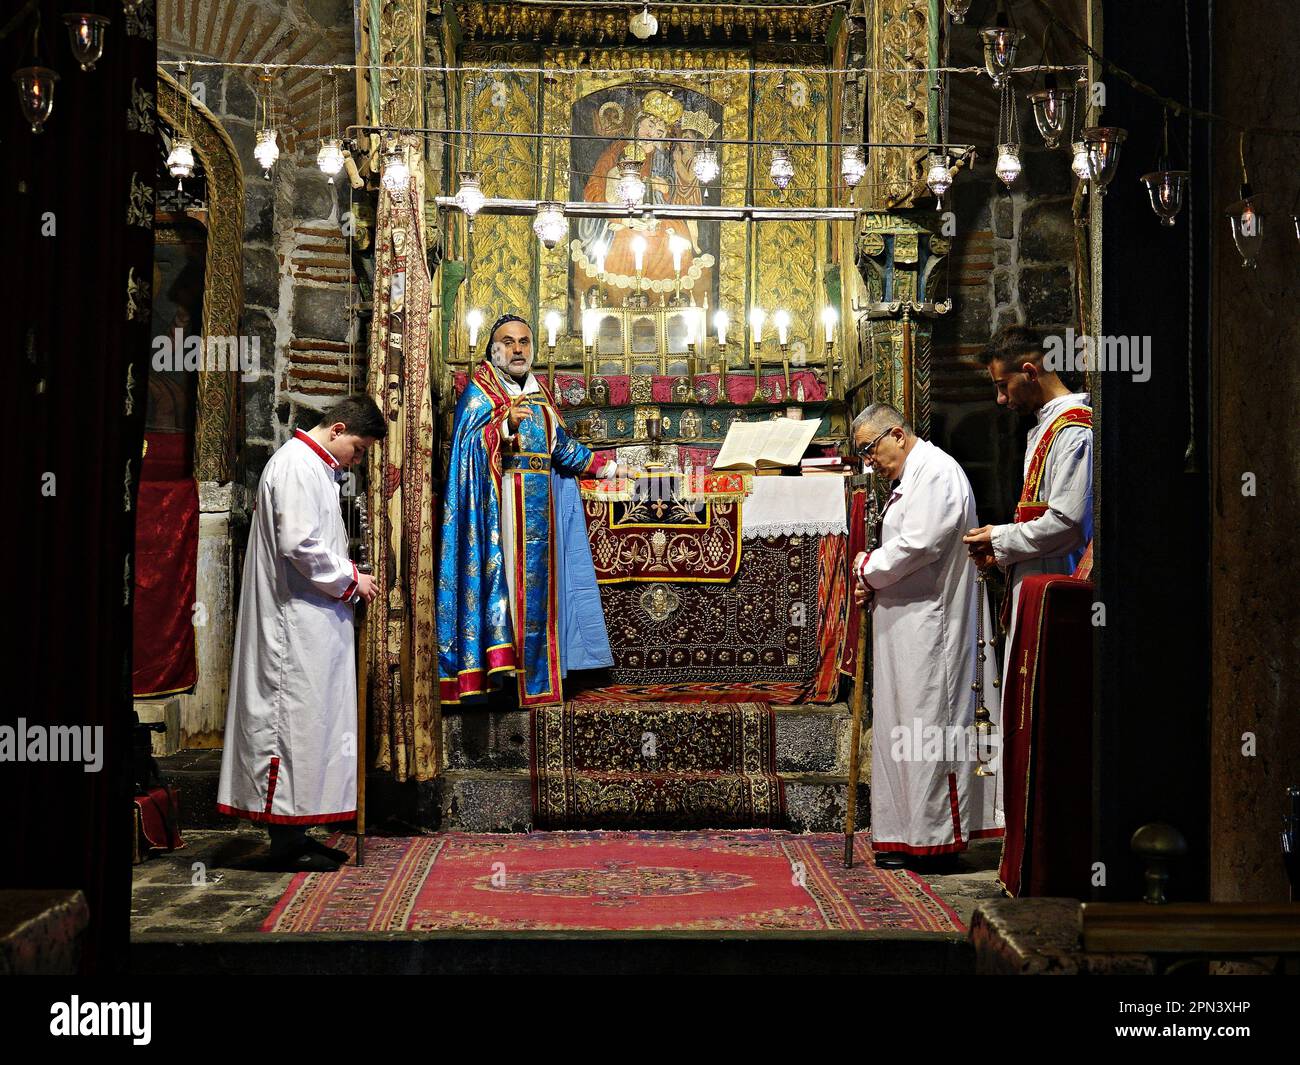 Priest Behnam Konutgan leads the mass at the Virgin Mary Church in Diyarbakir with his assistant clergyman and two young Assyrian. The last Assyrians of Diyarbakir, consisting of two families and a total of 12 people, celebrated the Easter Holiday with a mass held at the Virgin Mary Church. The priest Behnam Konutgan, who was commissioned from the Mardin Deyrul Zaferan Monastery because there was no cleric in the city who could administer the rite, directed it. A small number of Assyrians and their Armenian friends also attended the mass. After the mass, specially baked buns and red eggs were Stock Photo